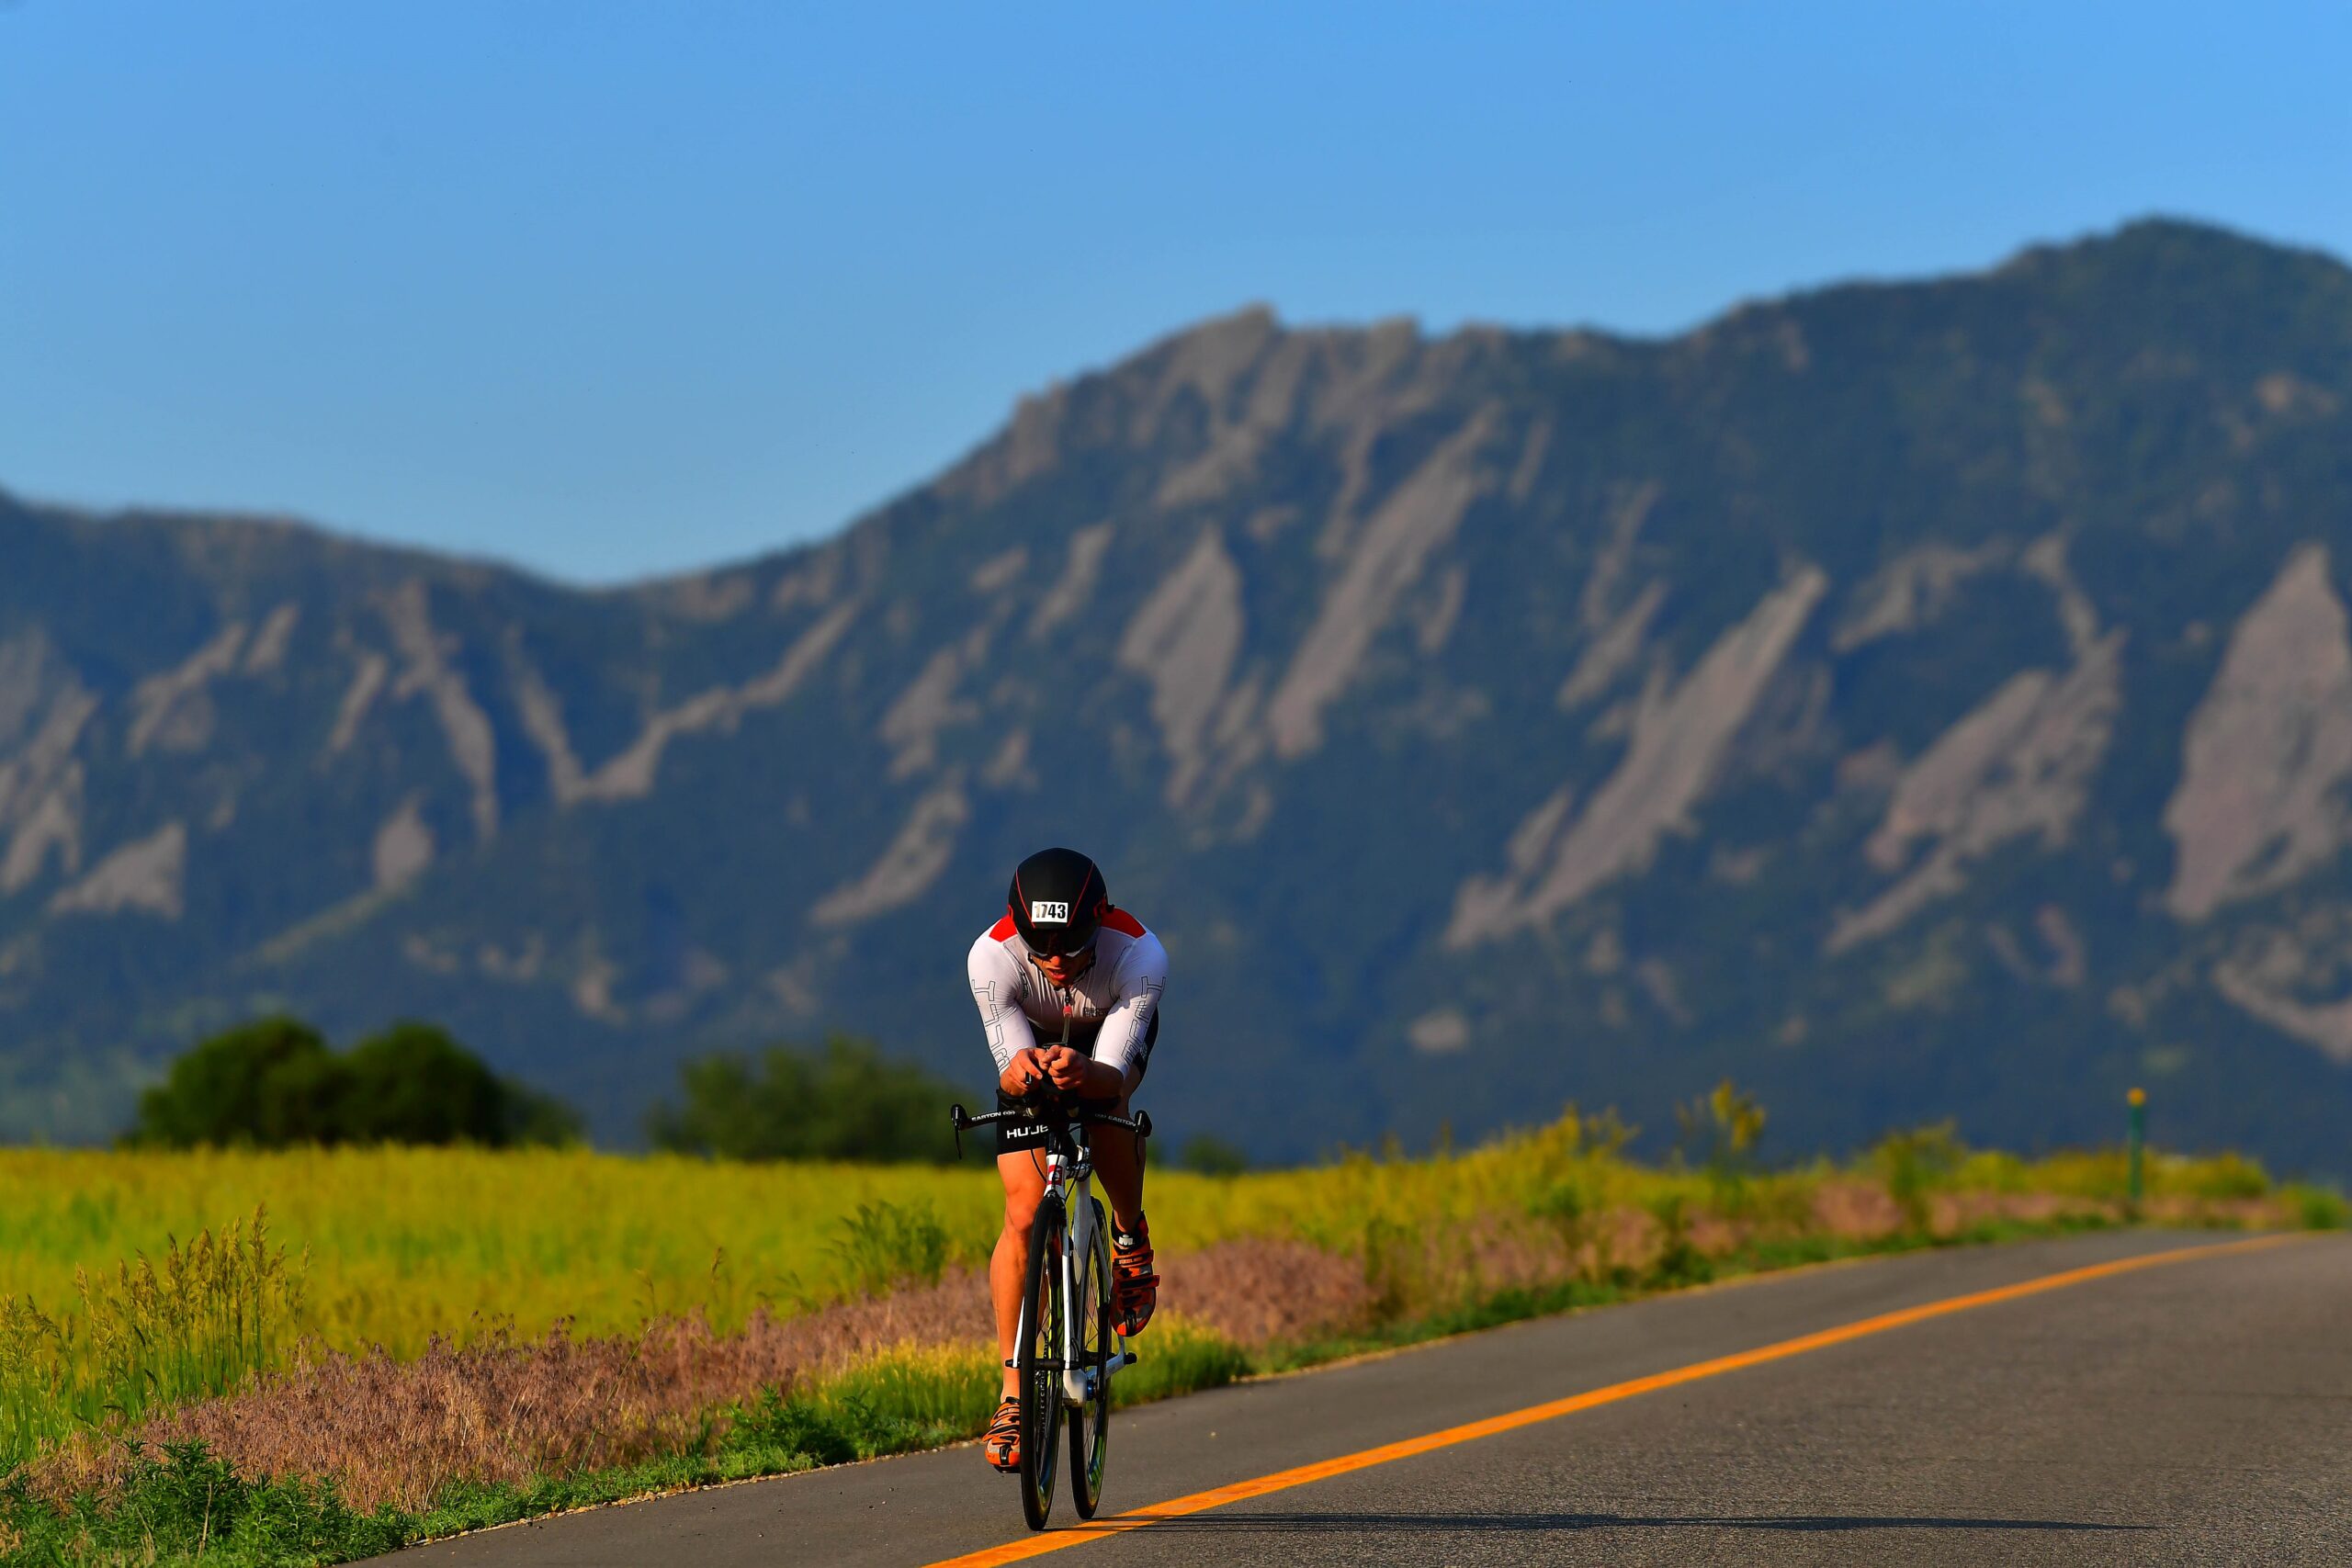 BOULDER, CO - JUNE 10: A general view of a biker in front of the Flatirons during the IRONMAN Bould...